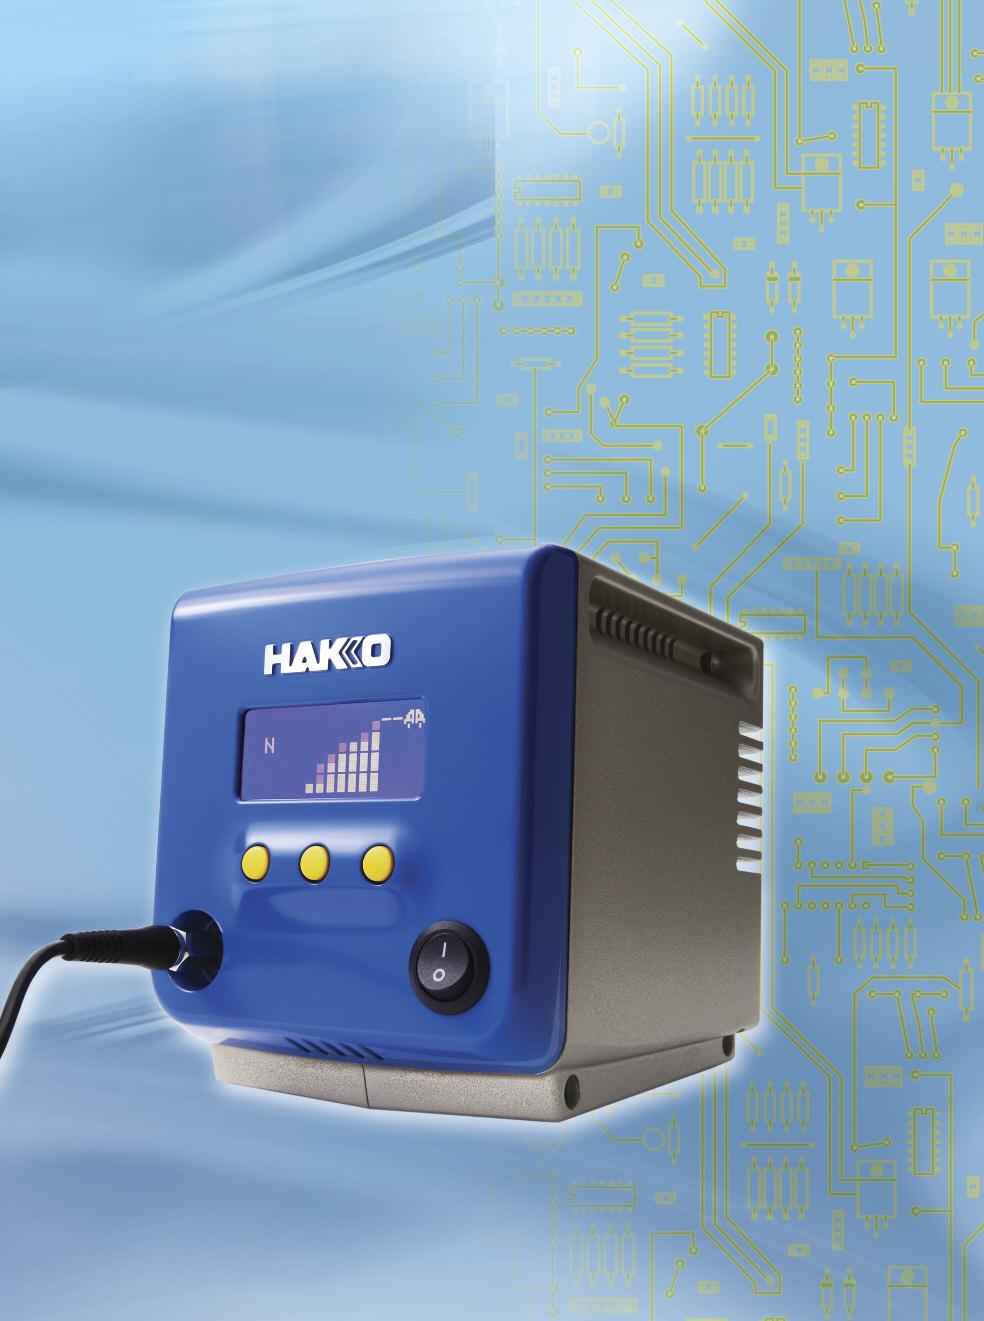 The Hakko FX-100 Soldering System The FX-100 soldering system brings RF induction heat soldering technology to an even higher performance level.